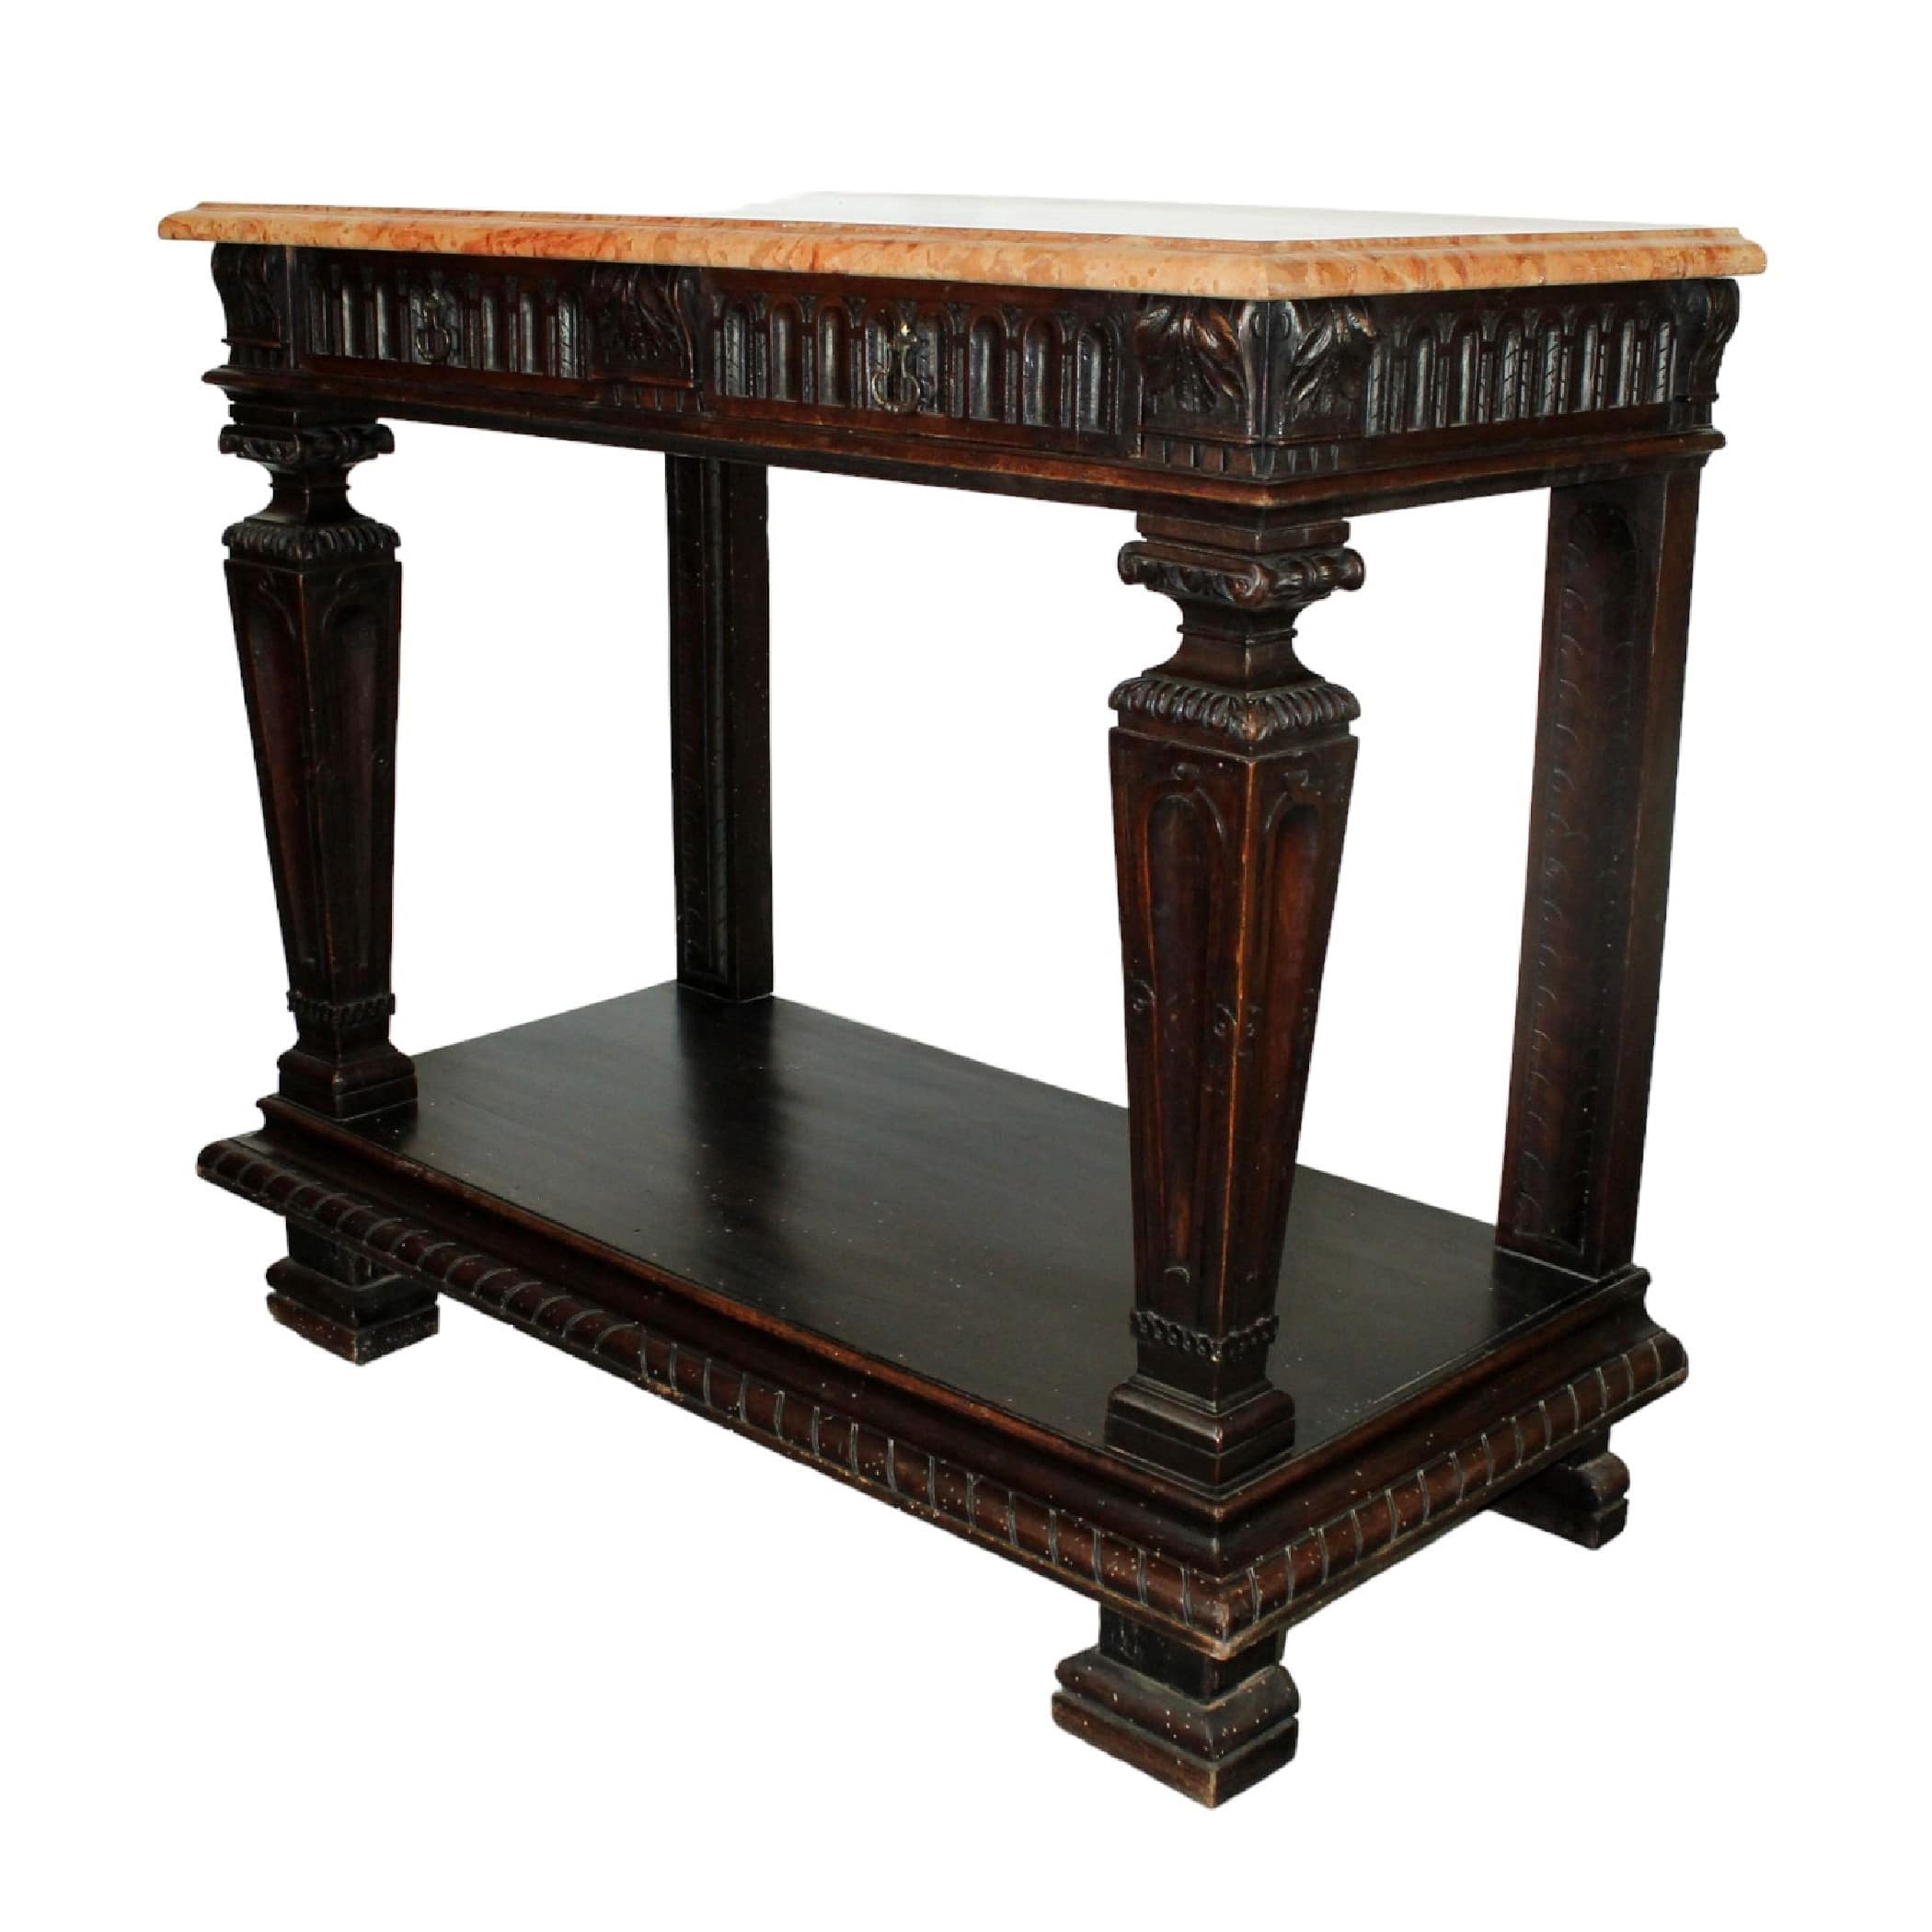 French Renaissance revival console table with marble top